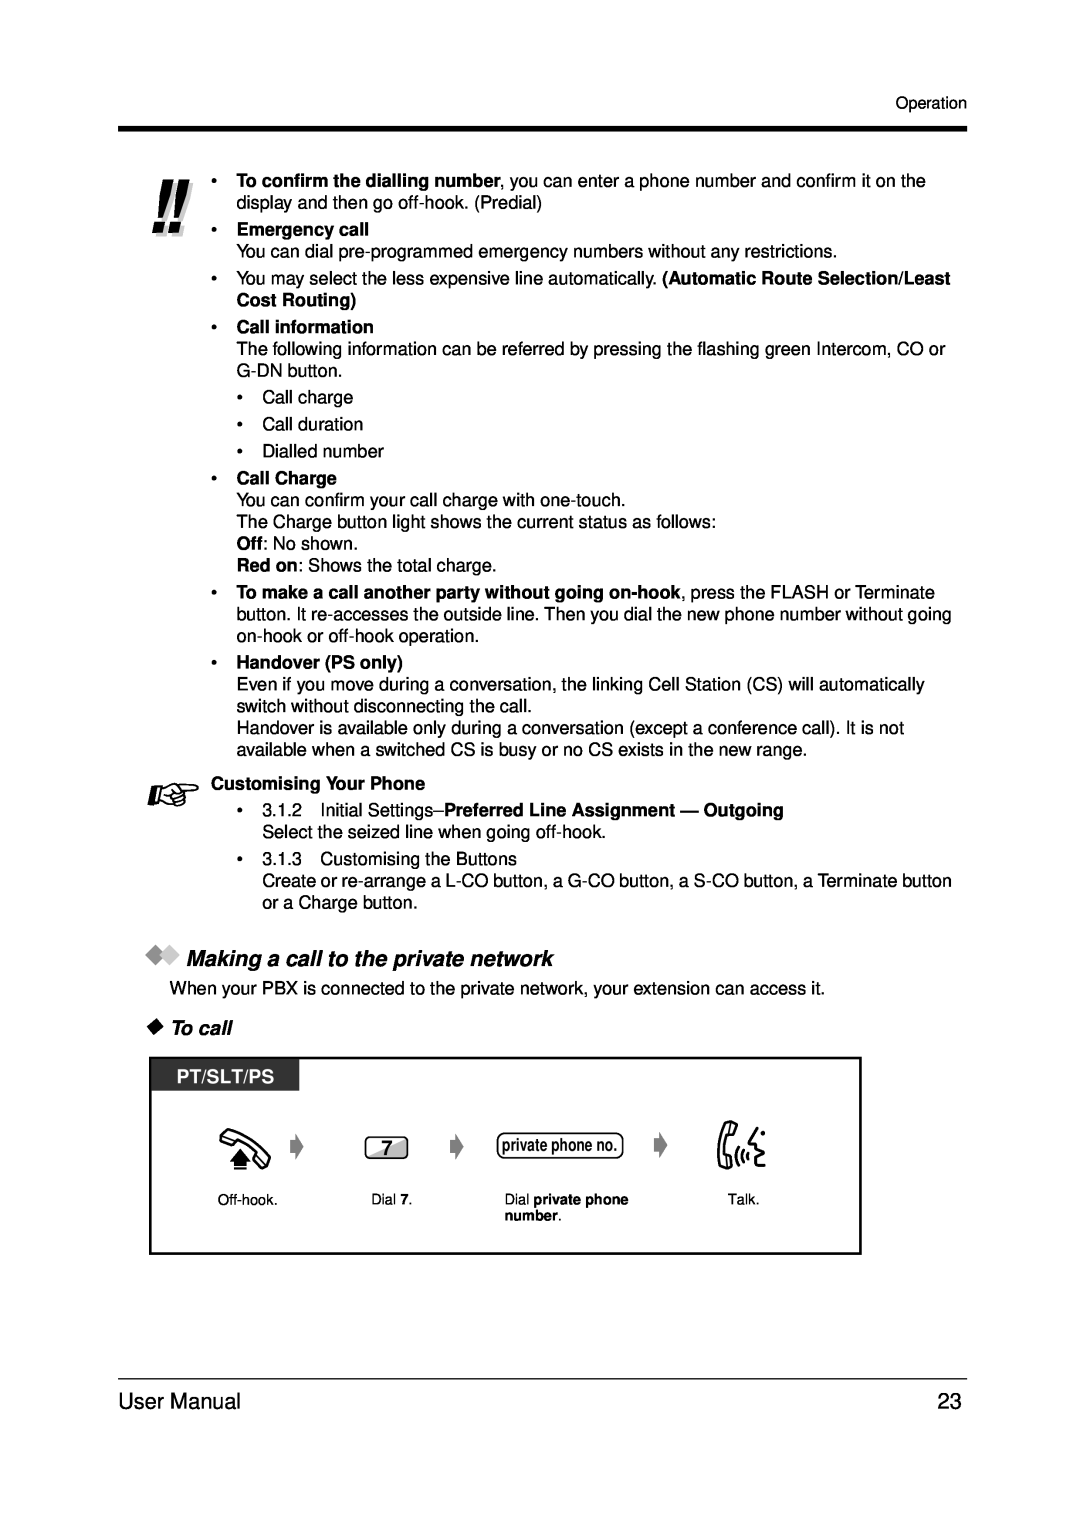 Panasonic KX-TDA200 user manual Making a call to the private network, To call, Pt/Slt/Ps, Emergency call, Call Charge 